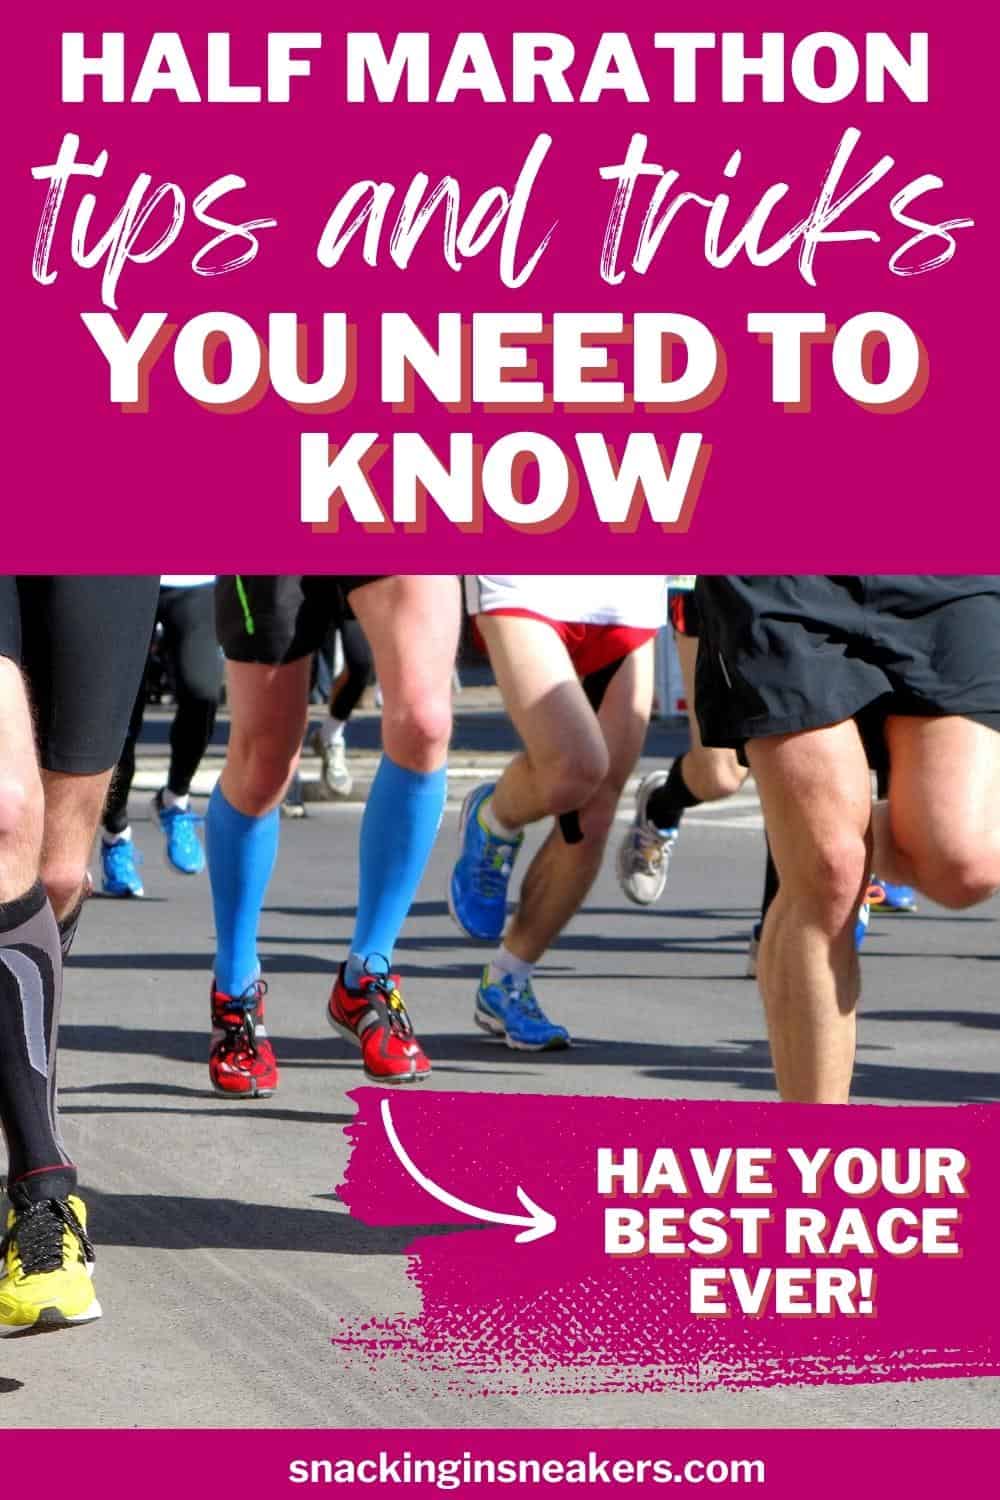 A group of runners doing a half marathon, with a text overlay that says half marathon tips and tricks you need to know.